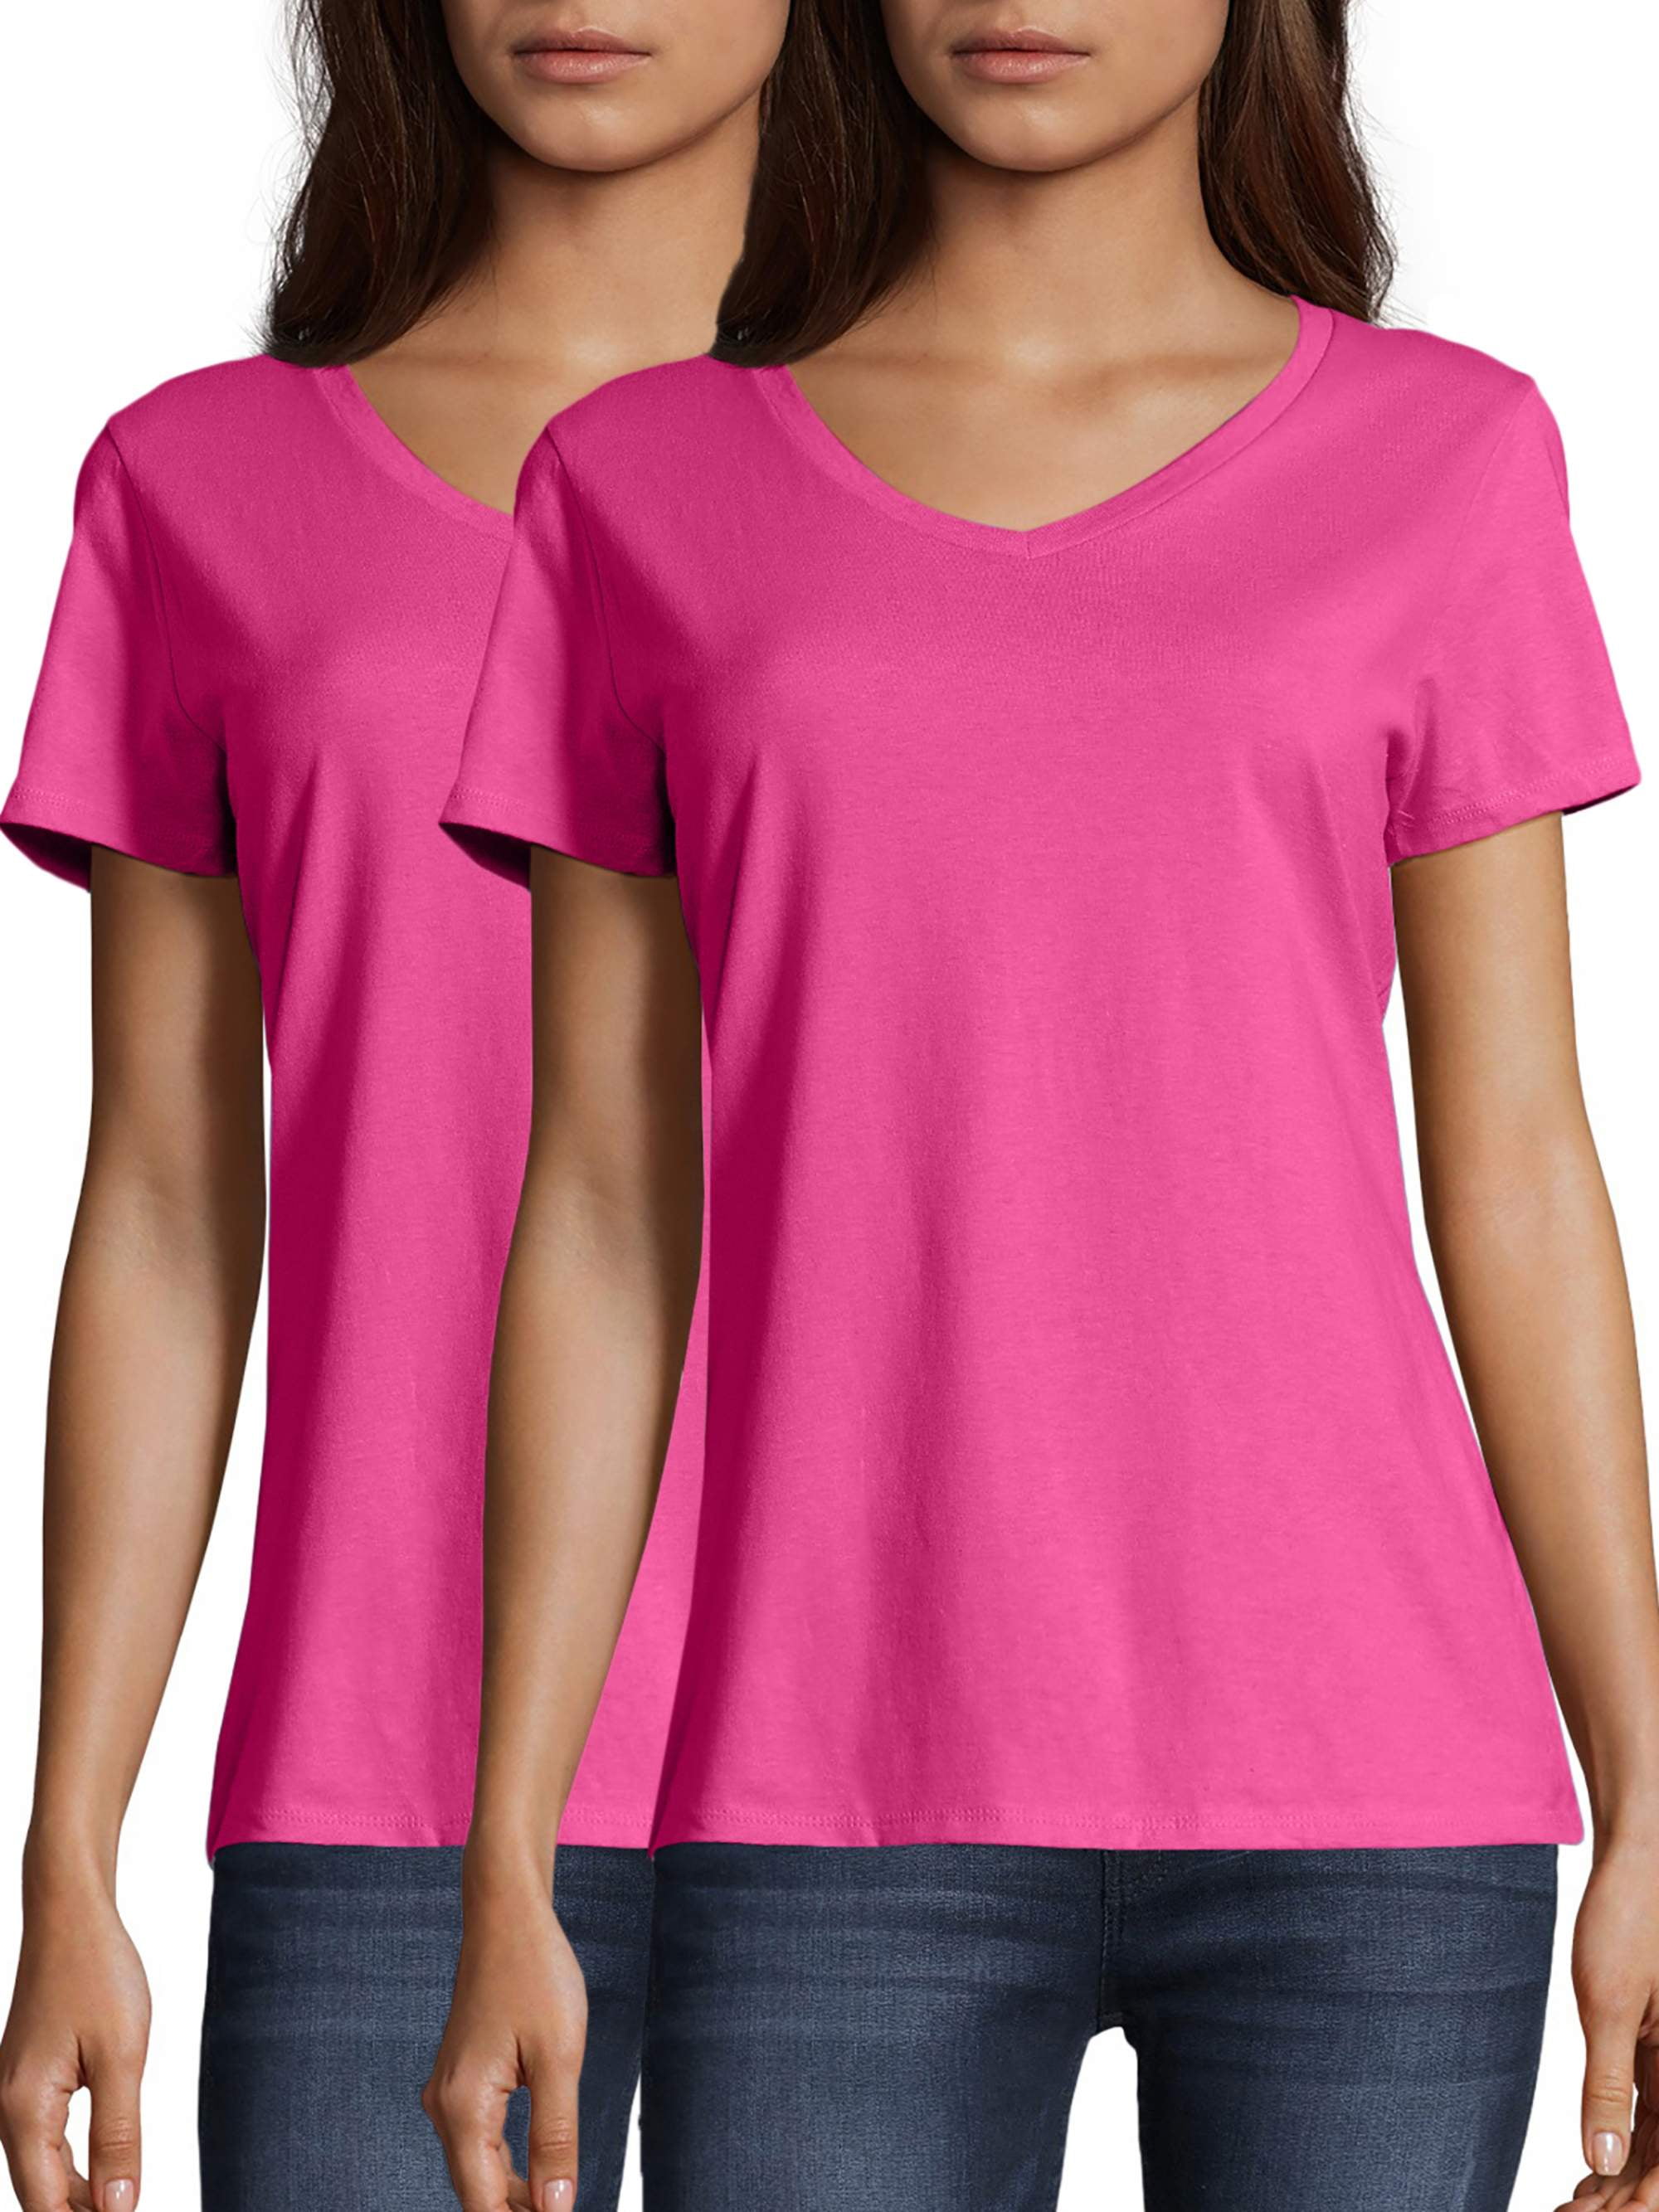 Details about   Hanes Womens Lightweight Nano-T Short Sleeve V-neck Tee 2-Pack 